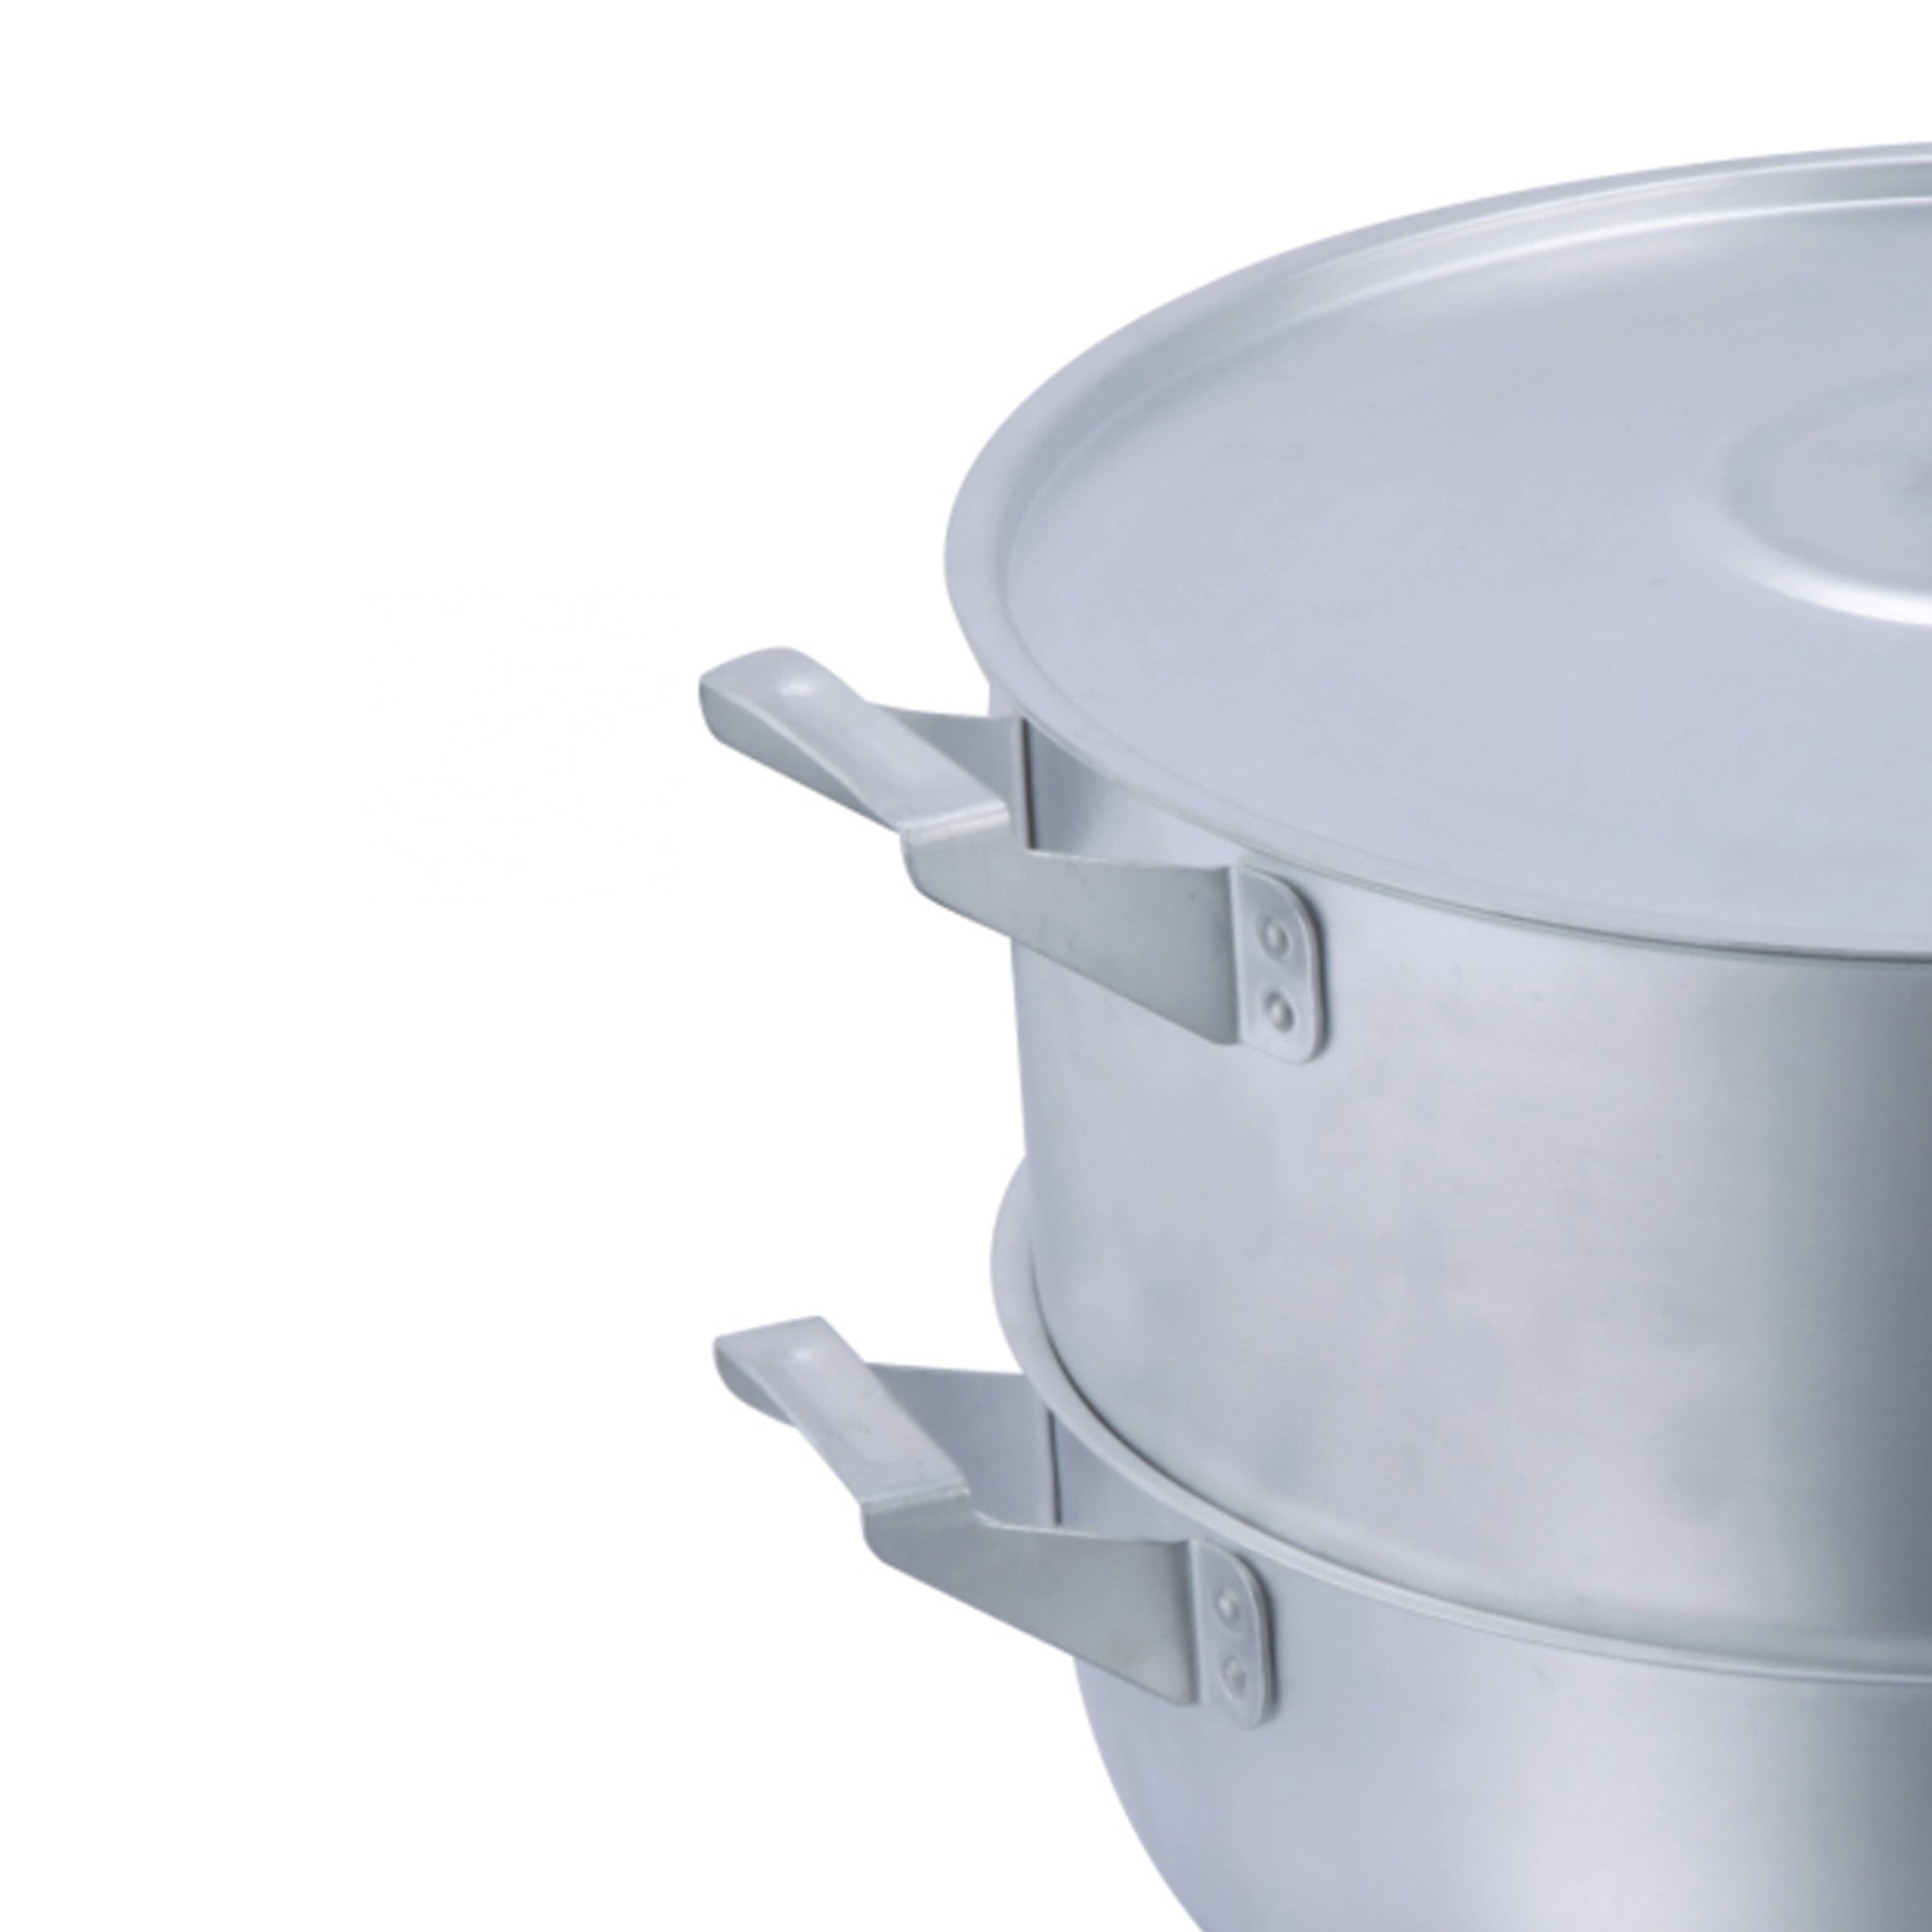 High Quality Double Aluminium Steamer Pot for Big Capacity Kitchen Pots Cooking Steamer